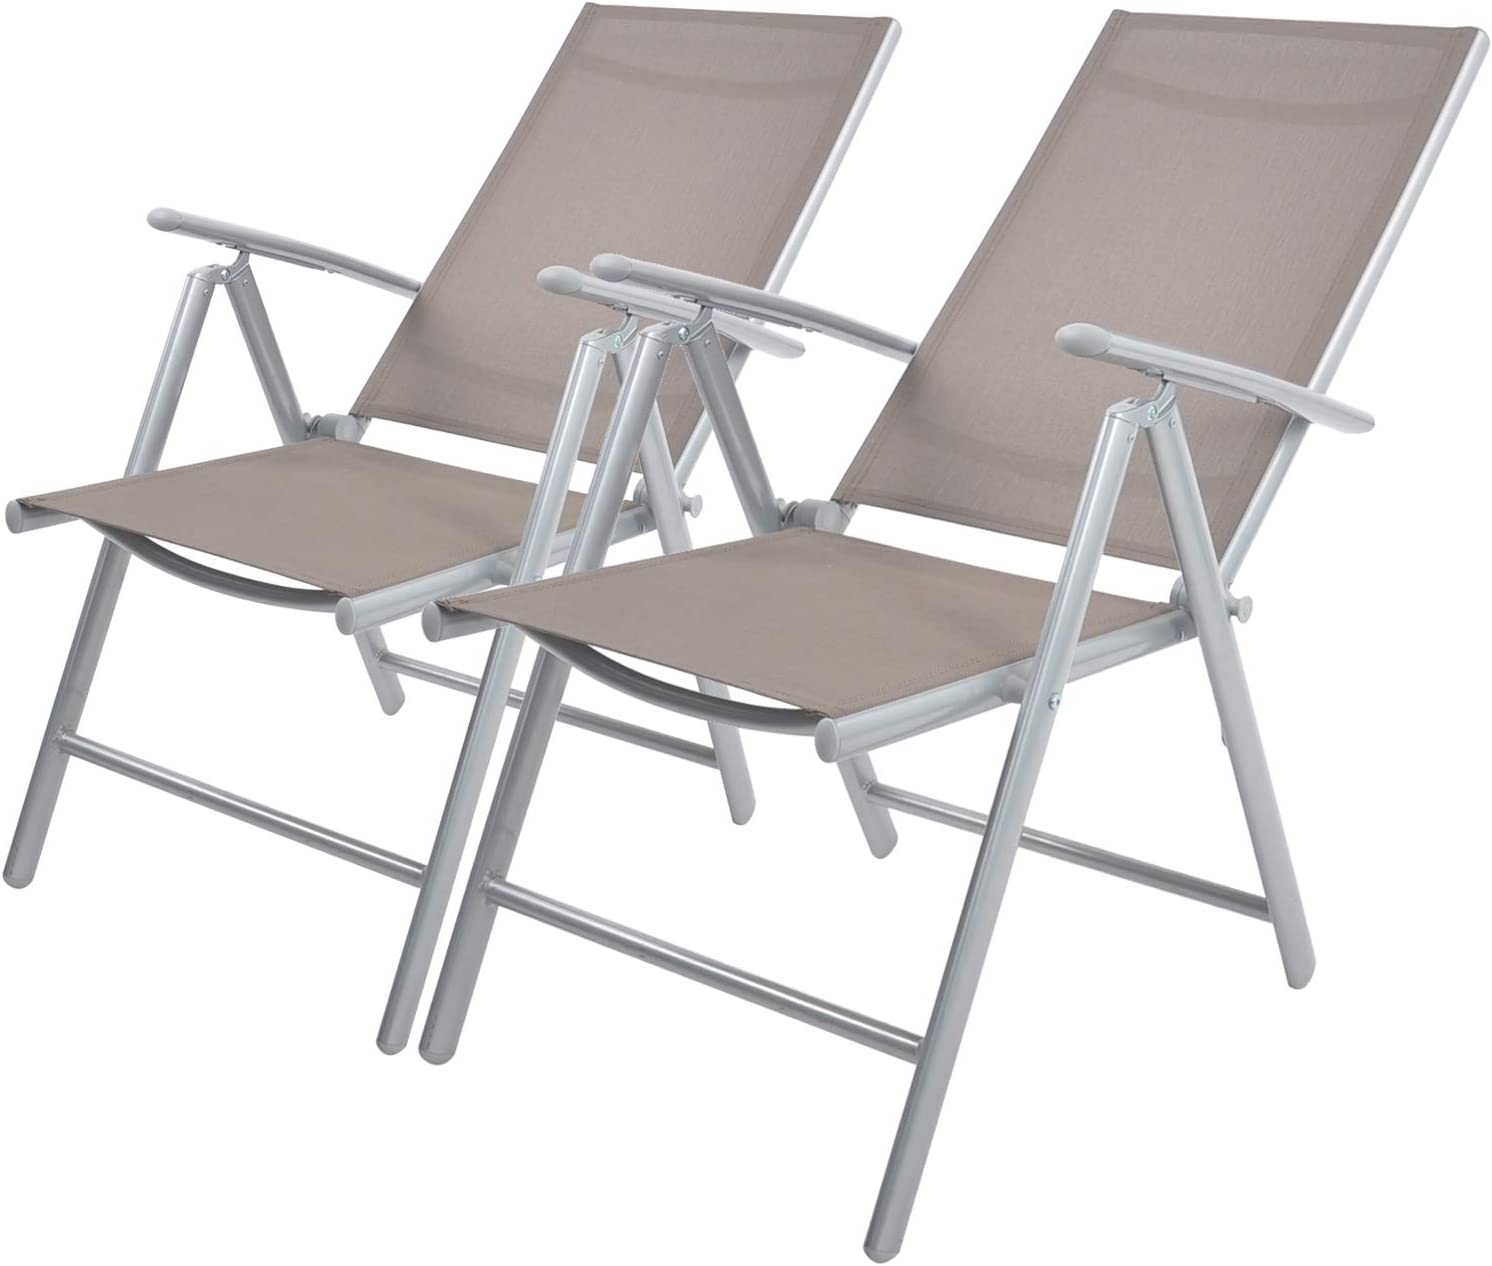 Set of 2 Patio Folding Sling Back Chairs Aluminum with Adjustable Reclining Back